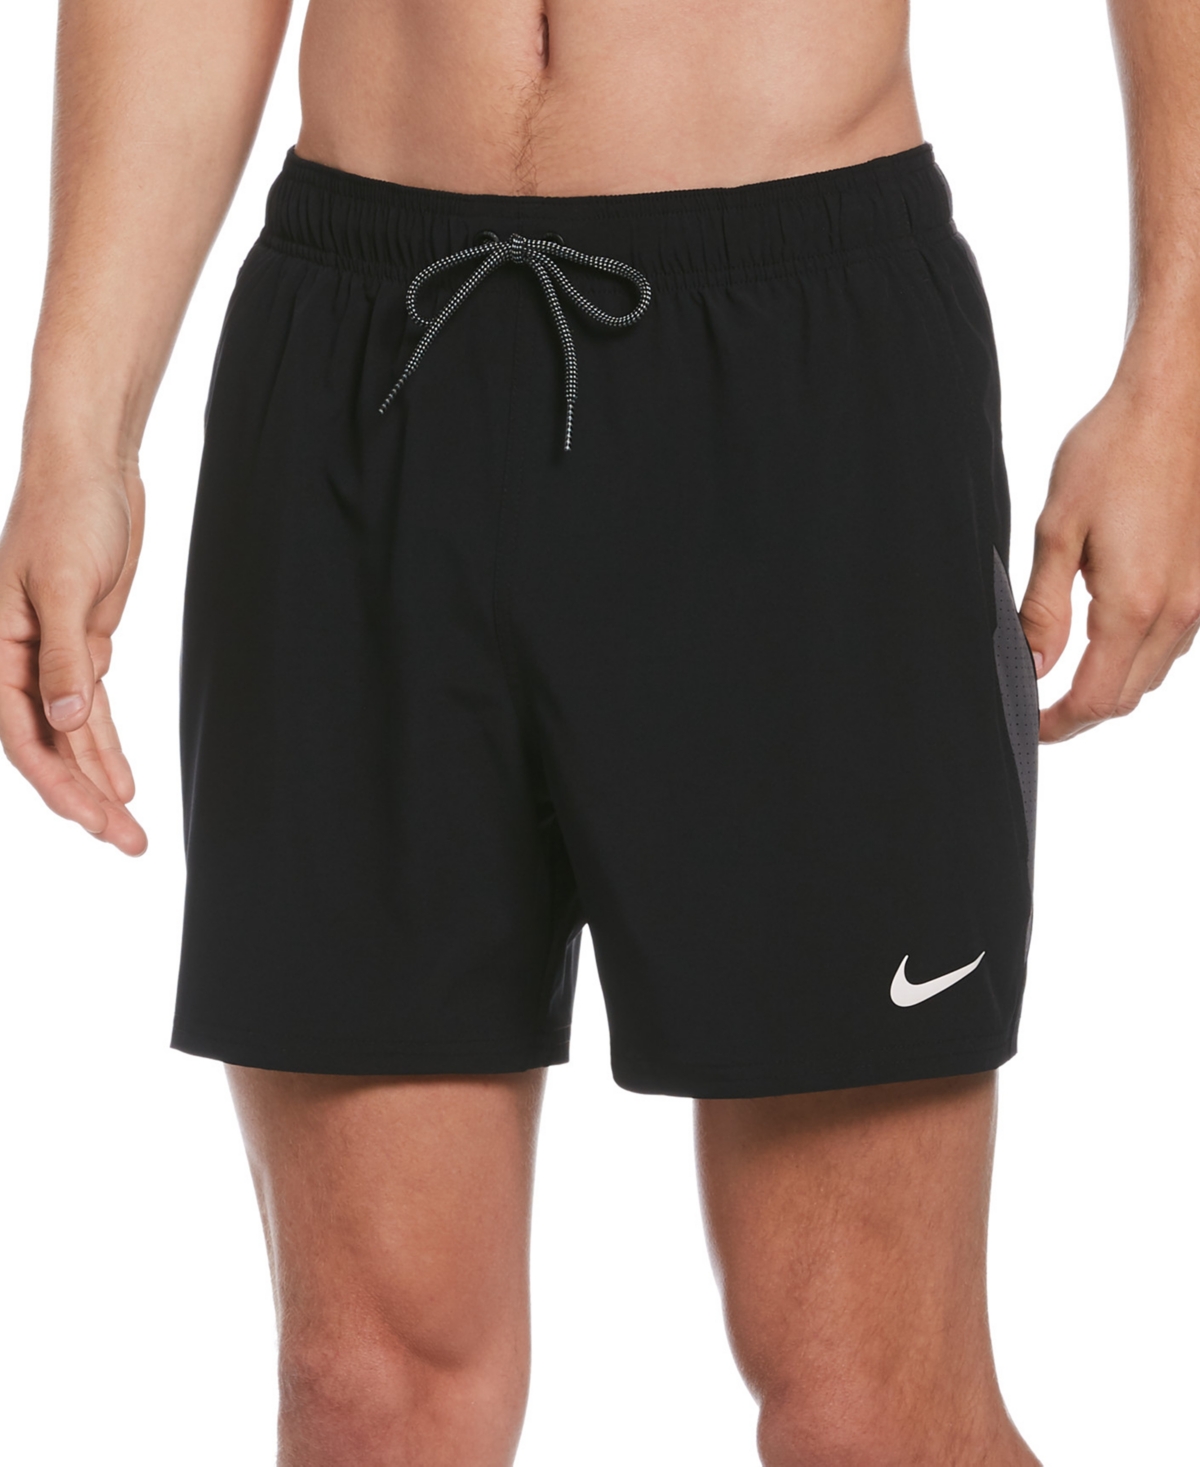 Nike Men's Contend Colorblocked 5